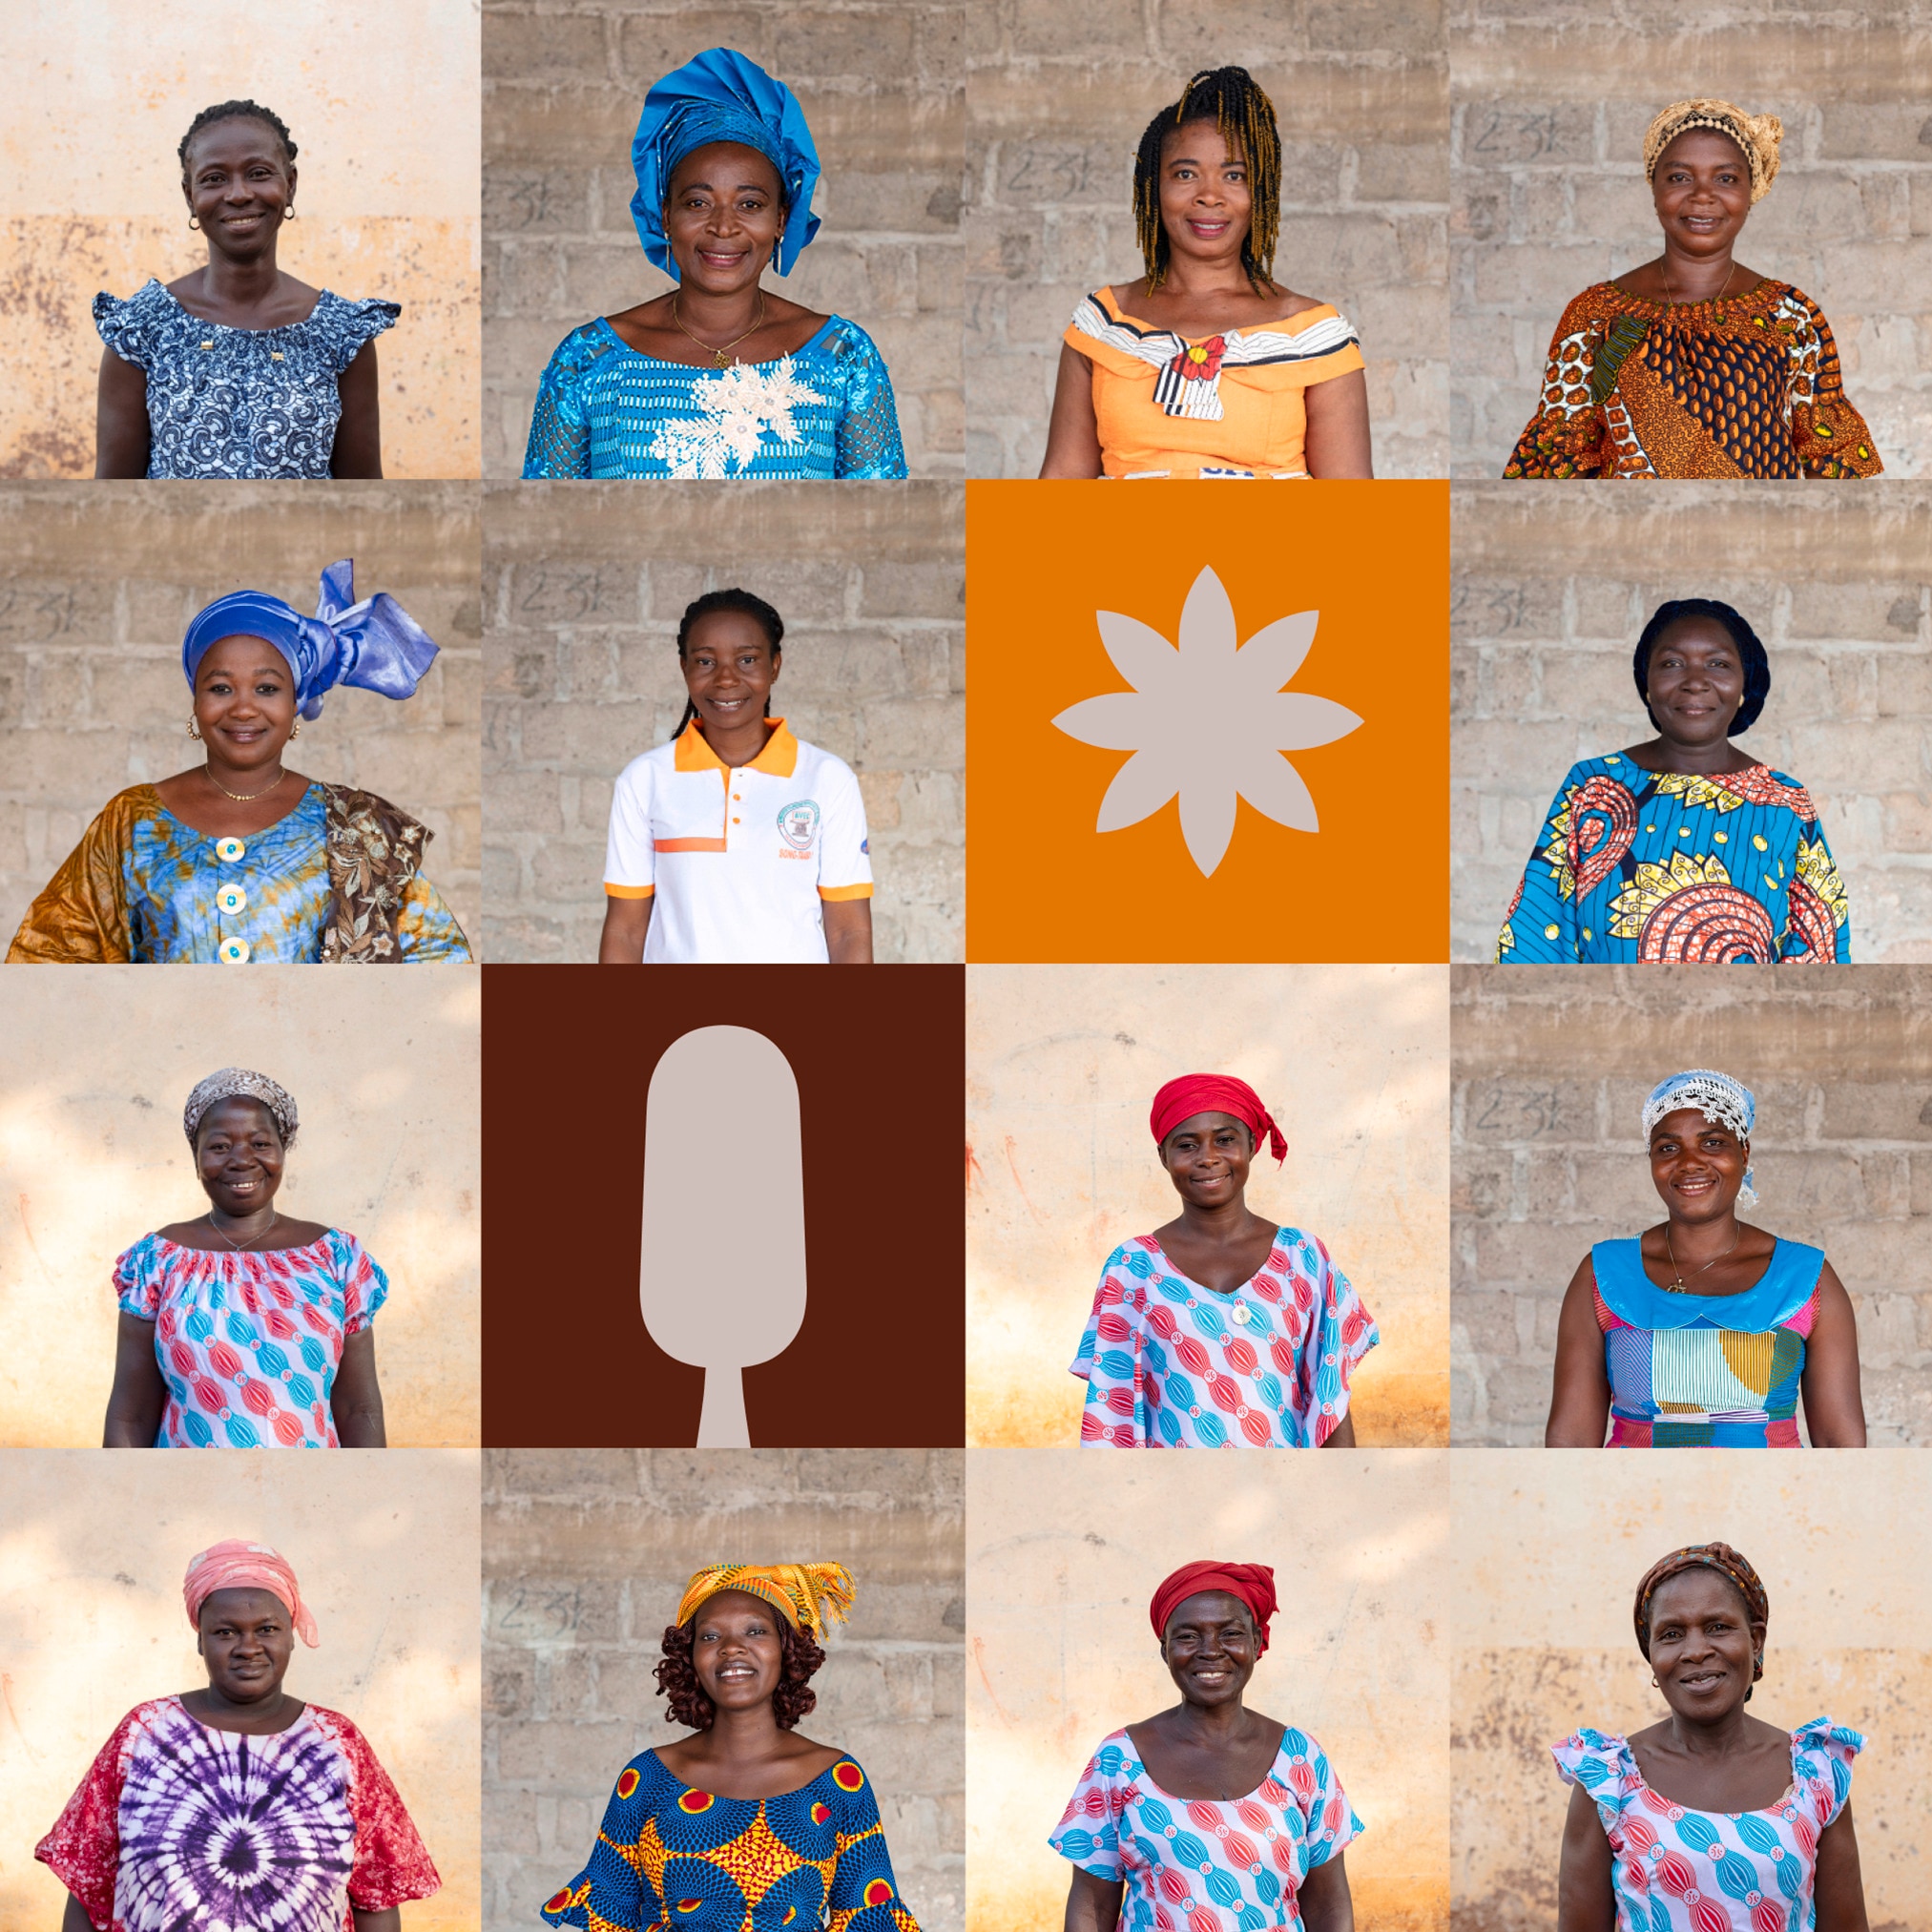 grid of 14 smiling african women portraits #1 - interspersed with a few colourful graphic square cut out illustrations